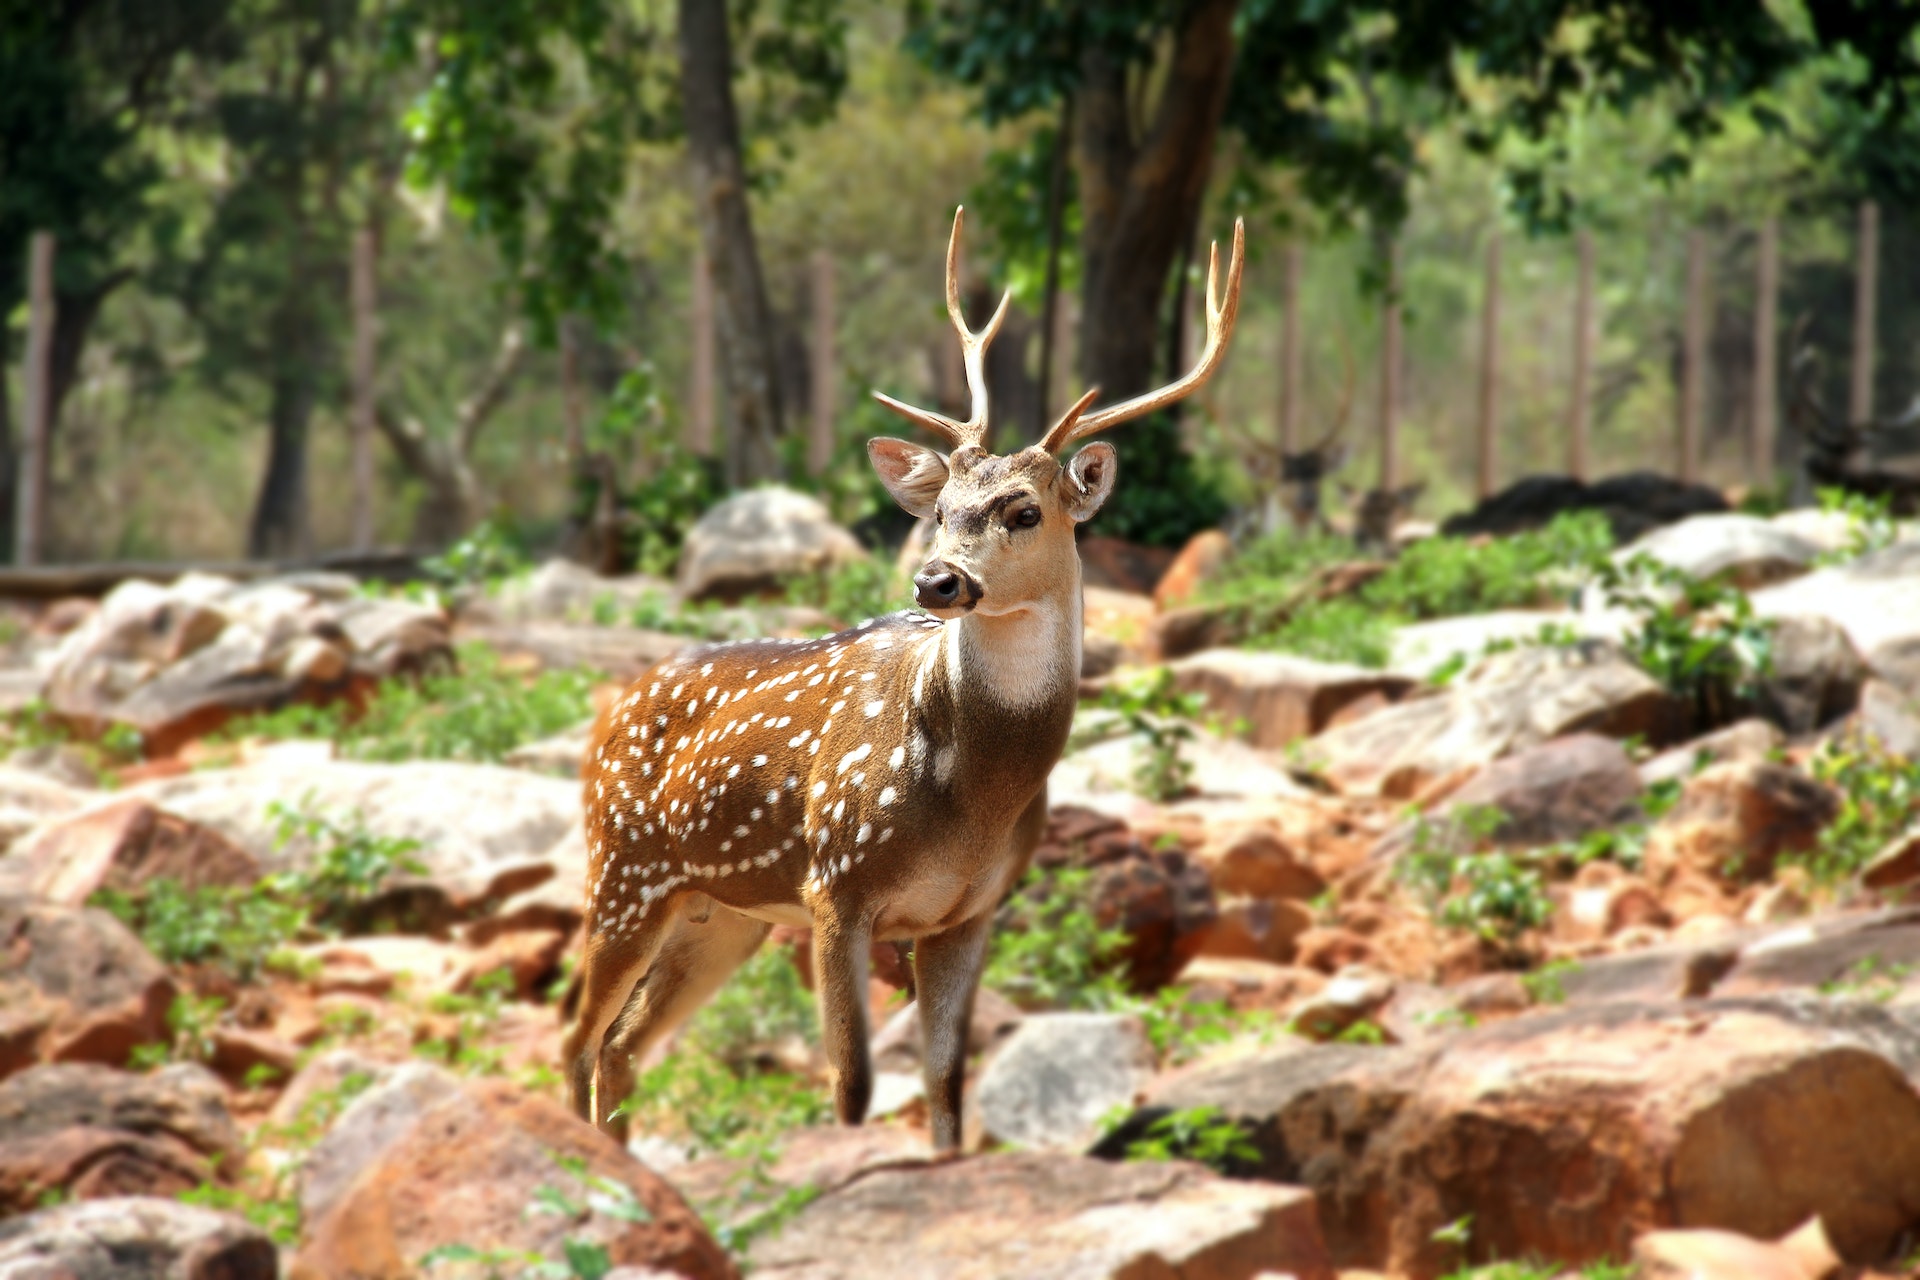 Wildlife Sanctuaries In India - A Guide To India's Natural Treasures